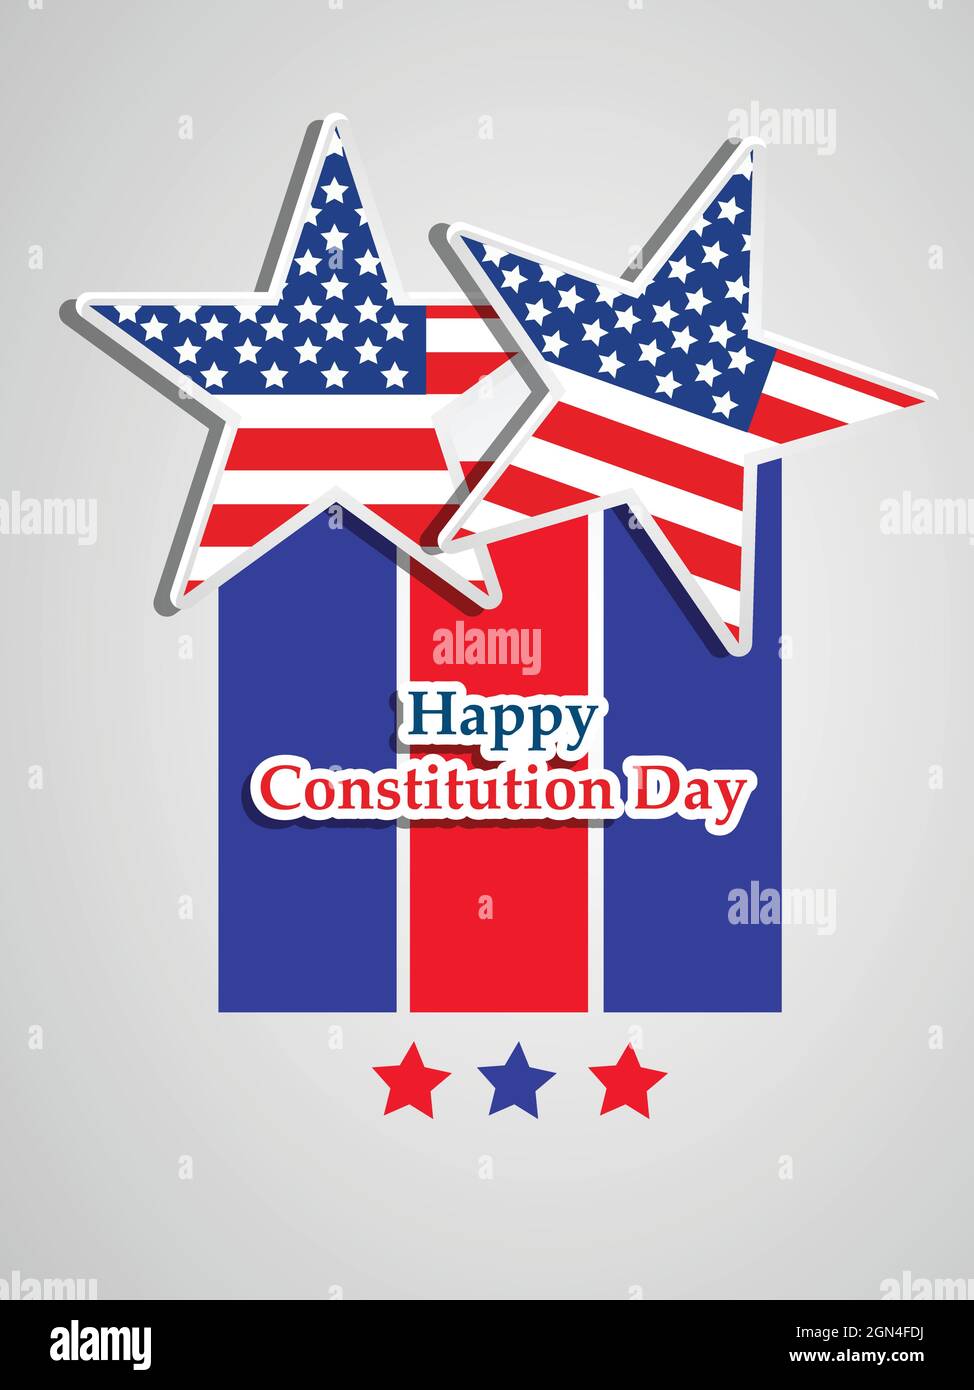 USA Constitution Day Stock Vector